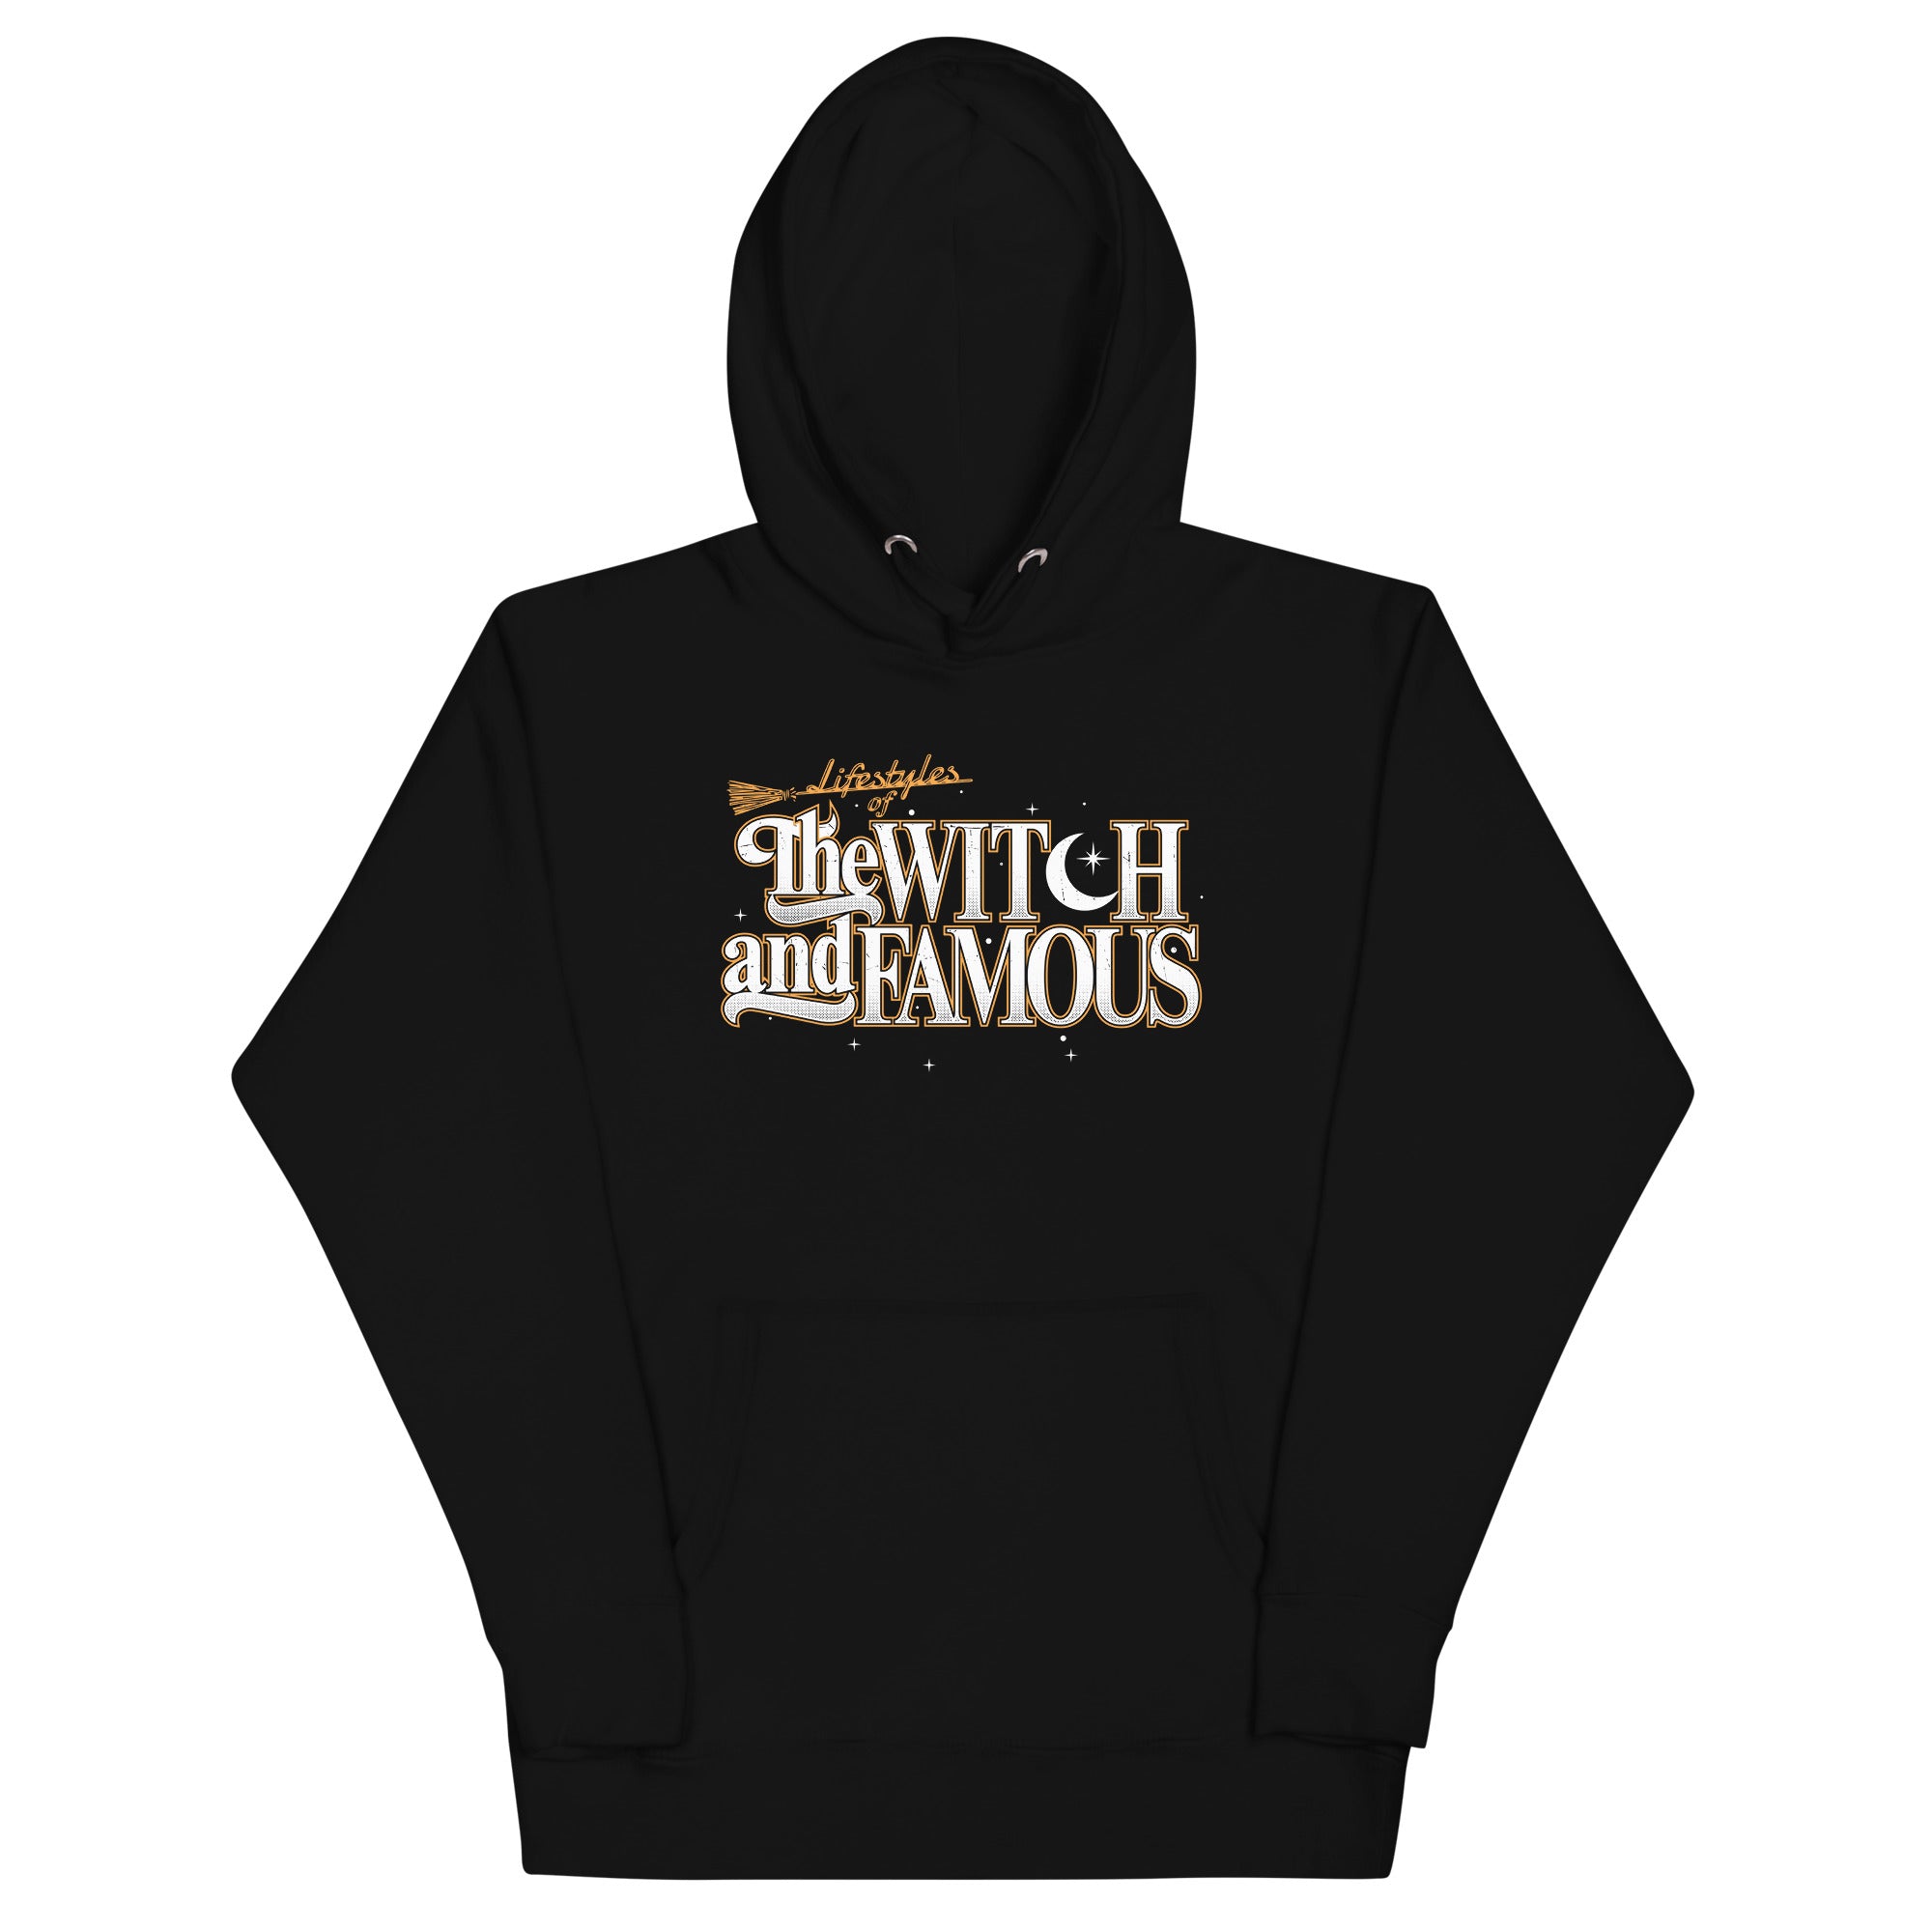 Lifestyles of the Witch and Famous Hoodie